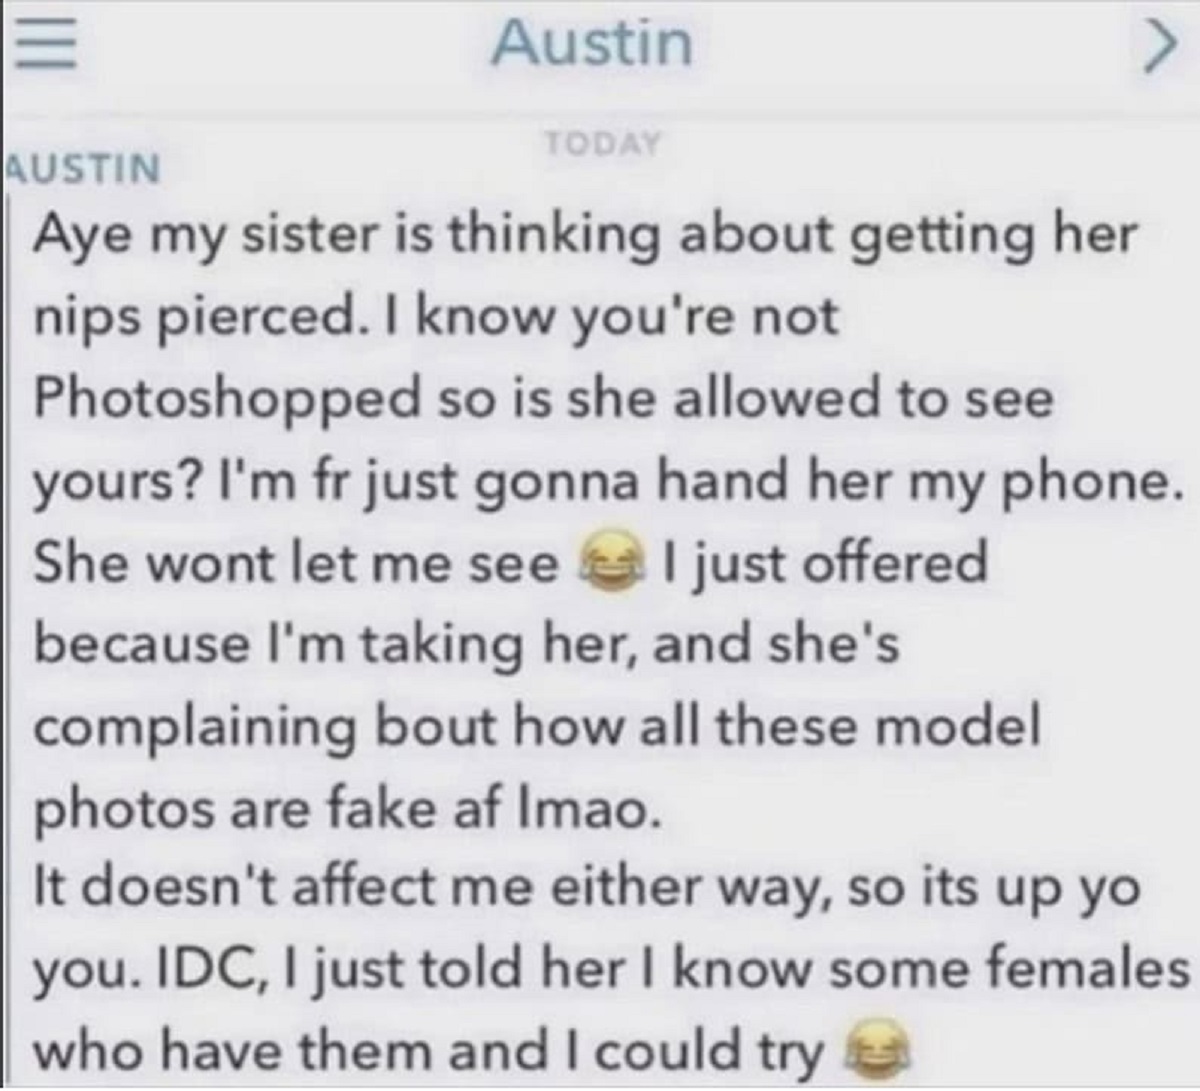 screenshot - Austin Austin Today > Aye my sister is thinking about getting her nips pierced. I know you're not Photoshopped so is she allowed to see yours? I'm fr just gonna hand her my phone. She wont let me see I just offered because I'm taking her, and